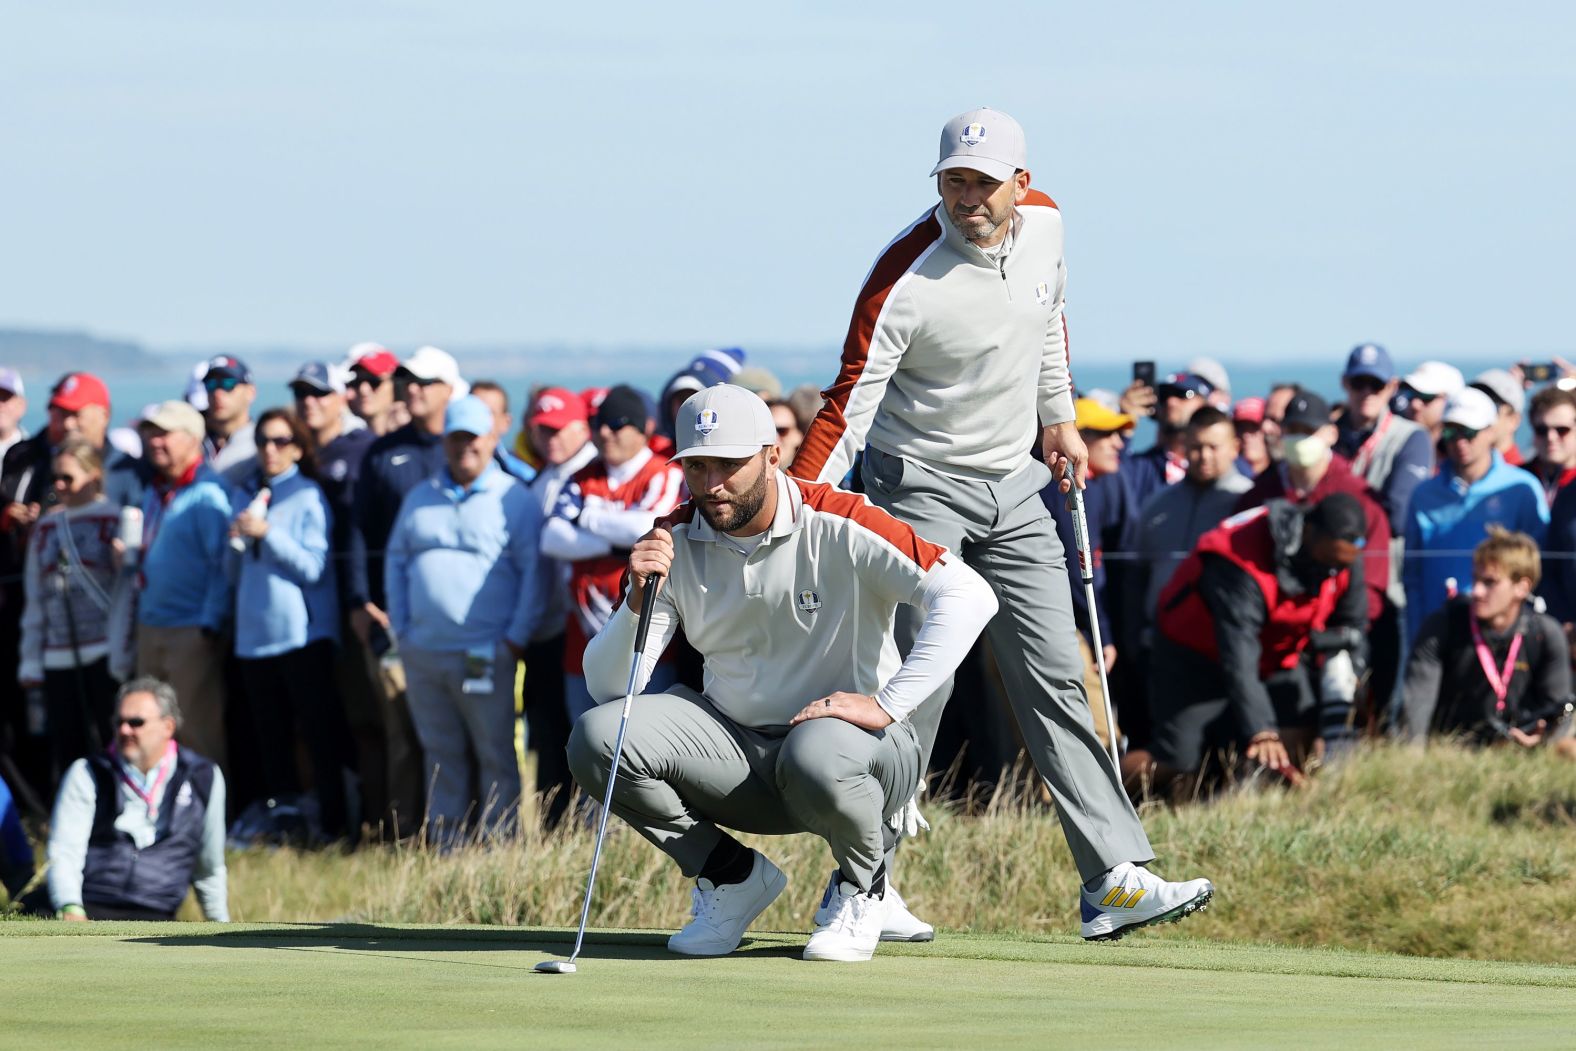 Team Europe's Jon Rahm (left) and Sergio Garcia line up a putt on the 15th green during Saturday morning Foursome matches on September 25. <a href="index.php?page=&url=https%3A%2F%2Fwww.cnn.com%2F2021%2F09%2F25%2Fgolf%2Fsergio-garcia-ryder-cup-history-spt-intl%2Findex.html" target="_blank">Garcia made Ryder Cup history</a> by becoming the player with the most matches won in the tournament's history, after their victory over Brooks Koepka and Daniel Berger of Team US.